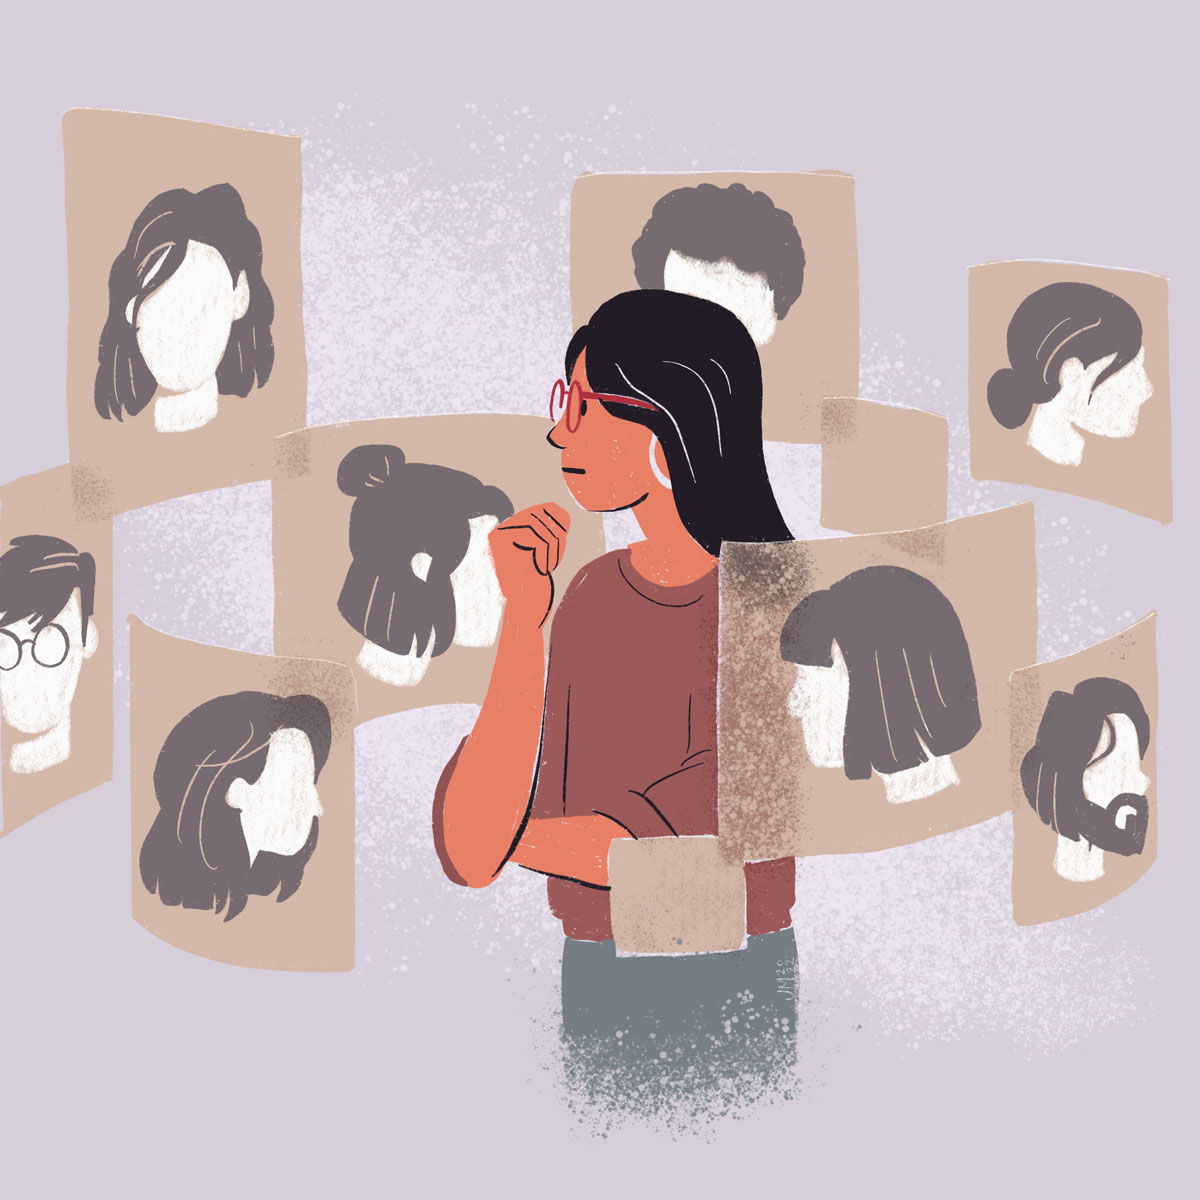 Illustration of person trying to find the right therapist